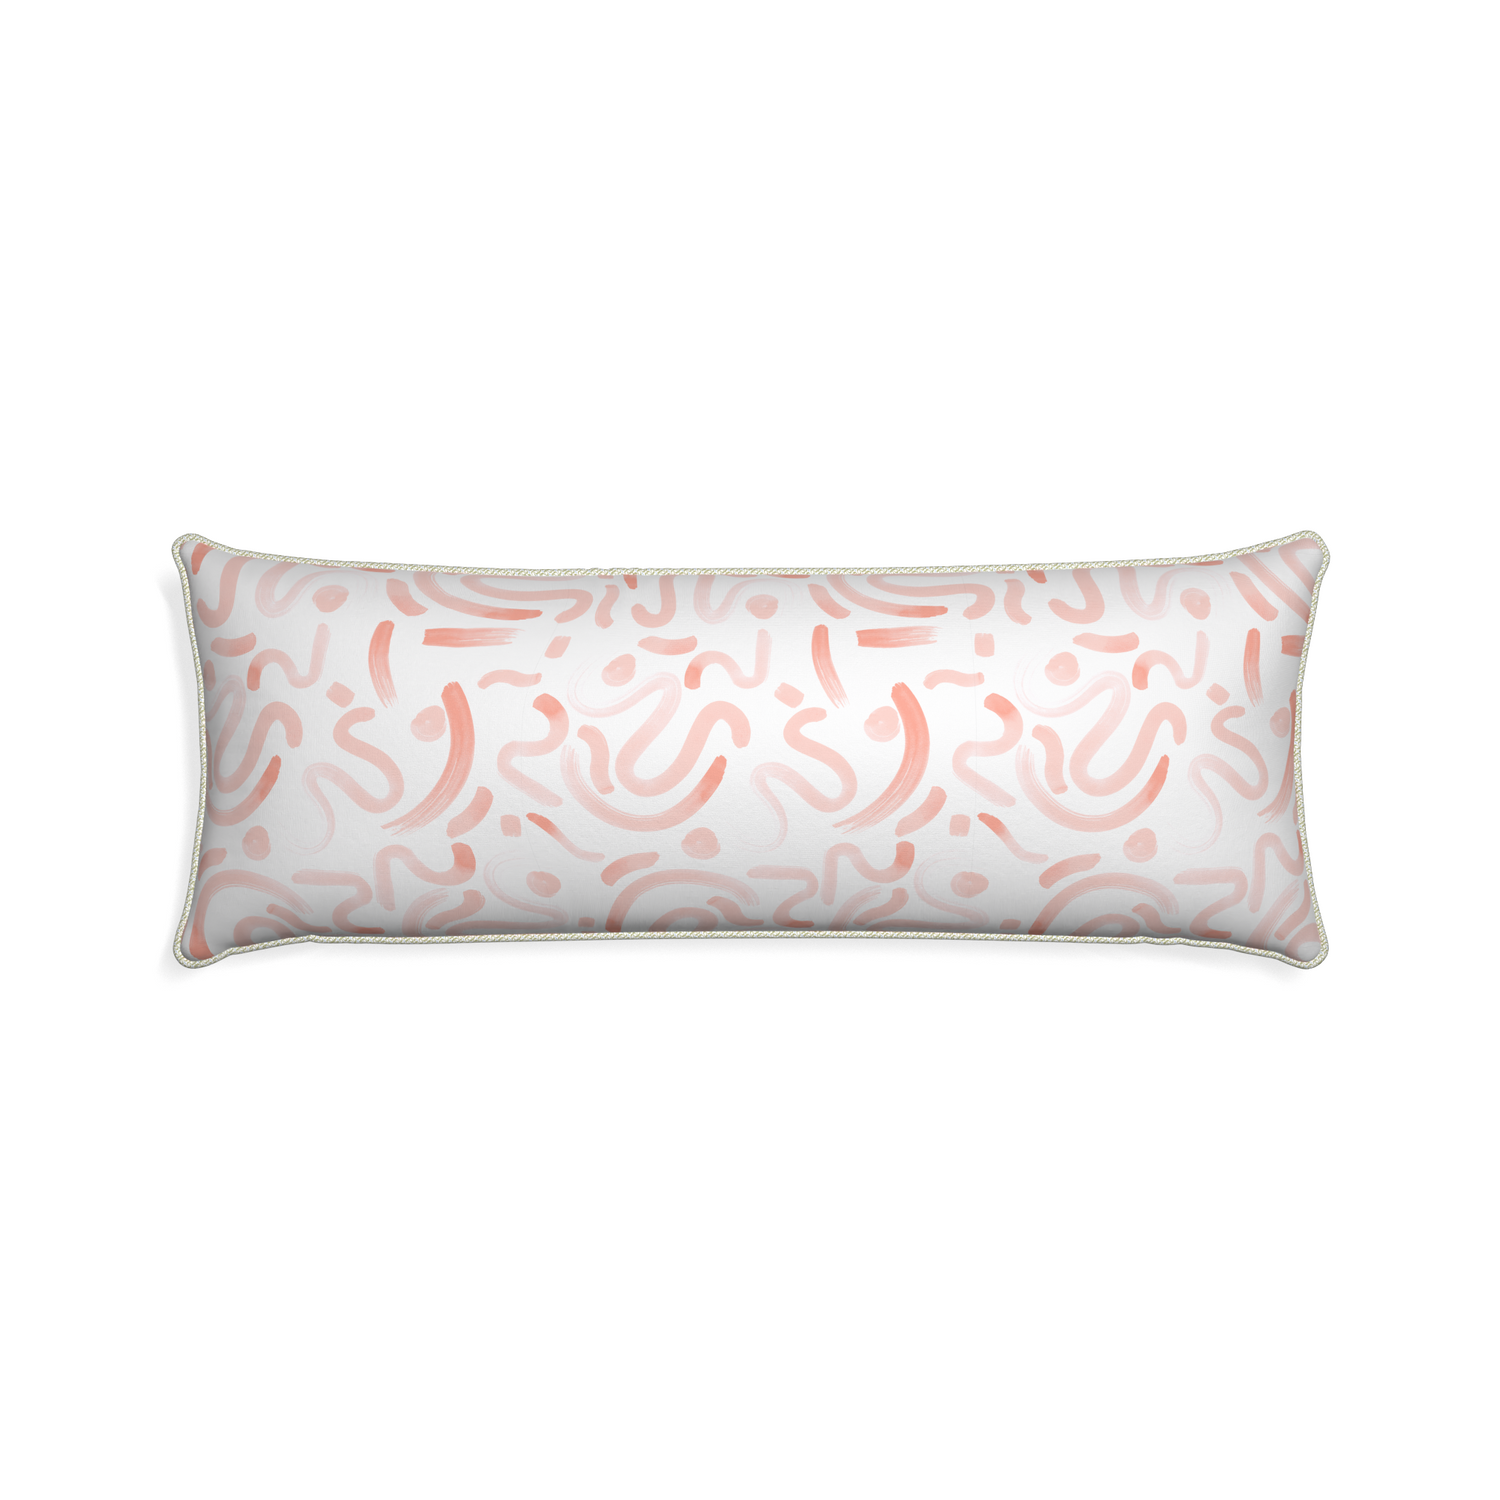 Xl-lumbar hockney pink custom pillow with l piping on white background